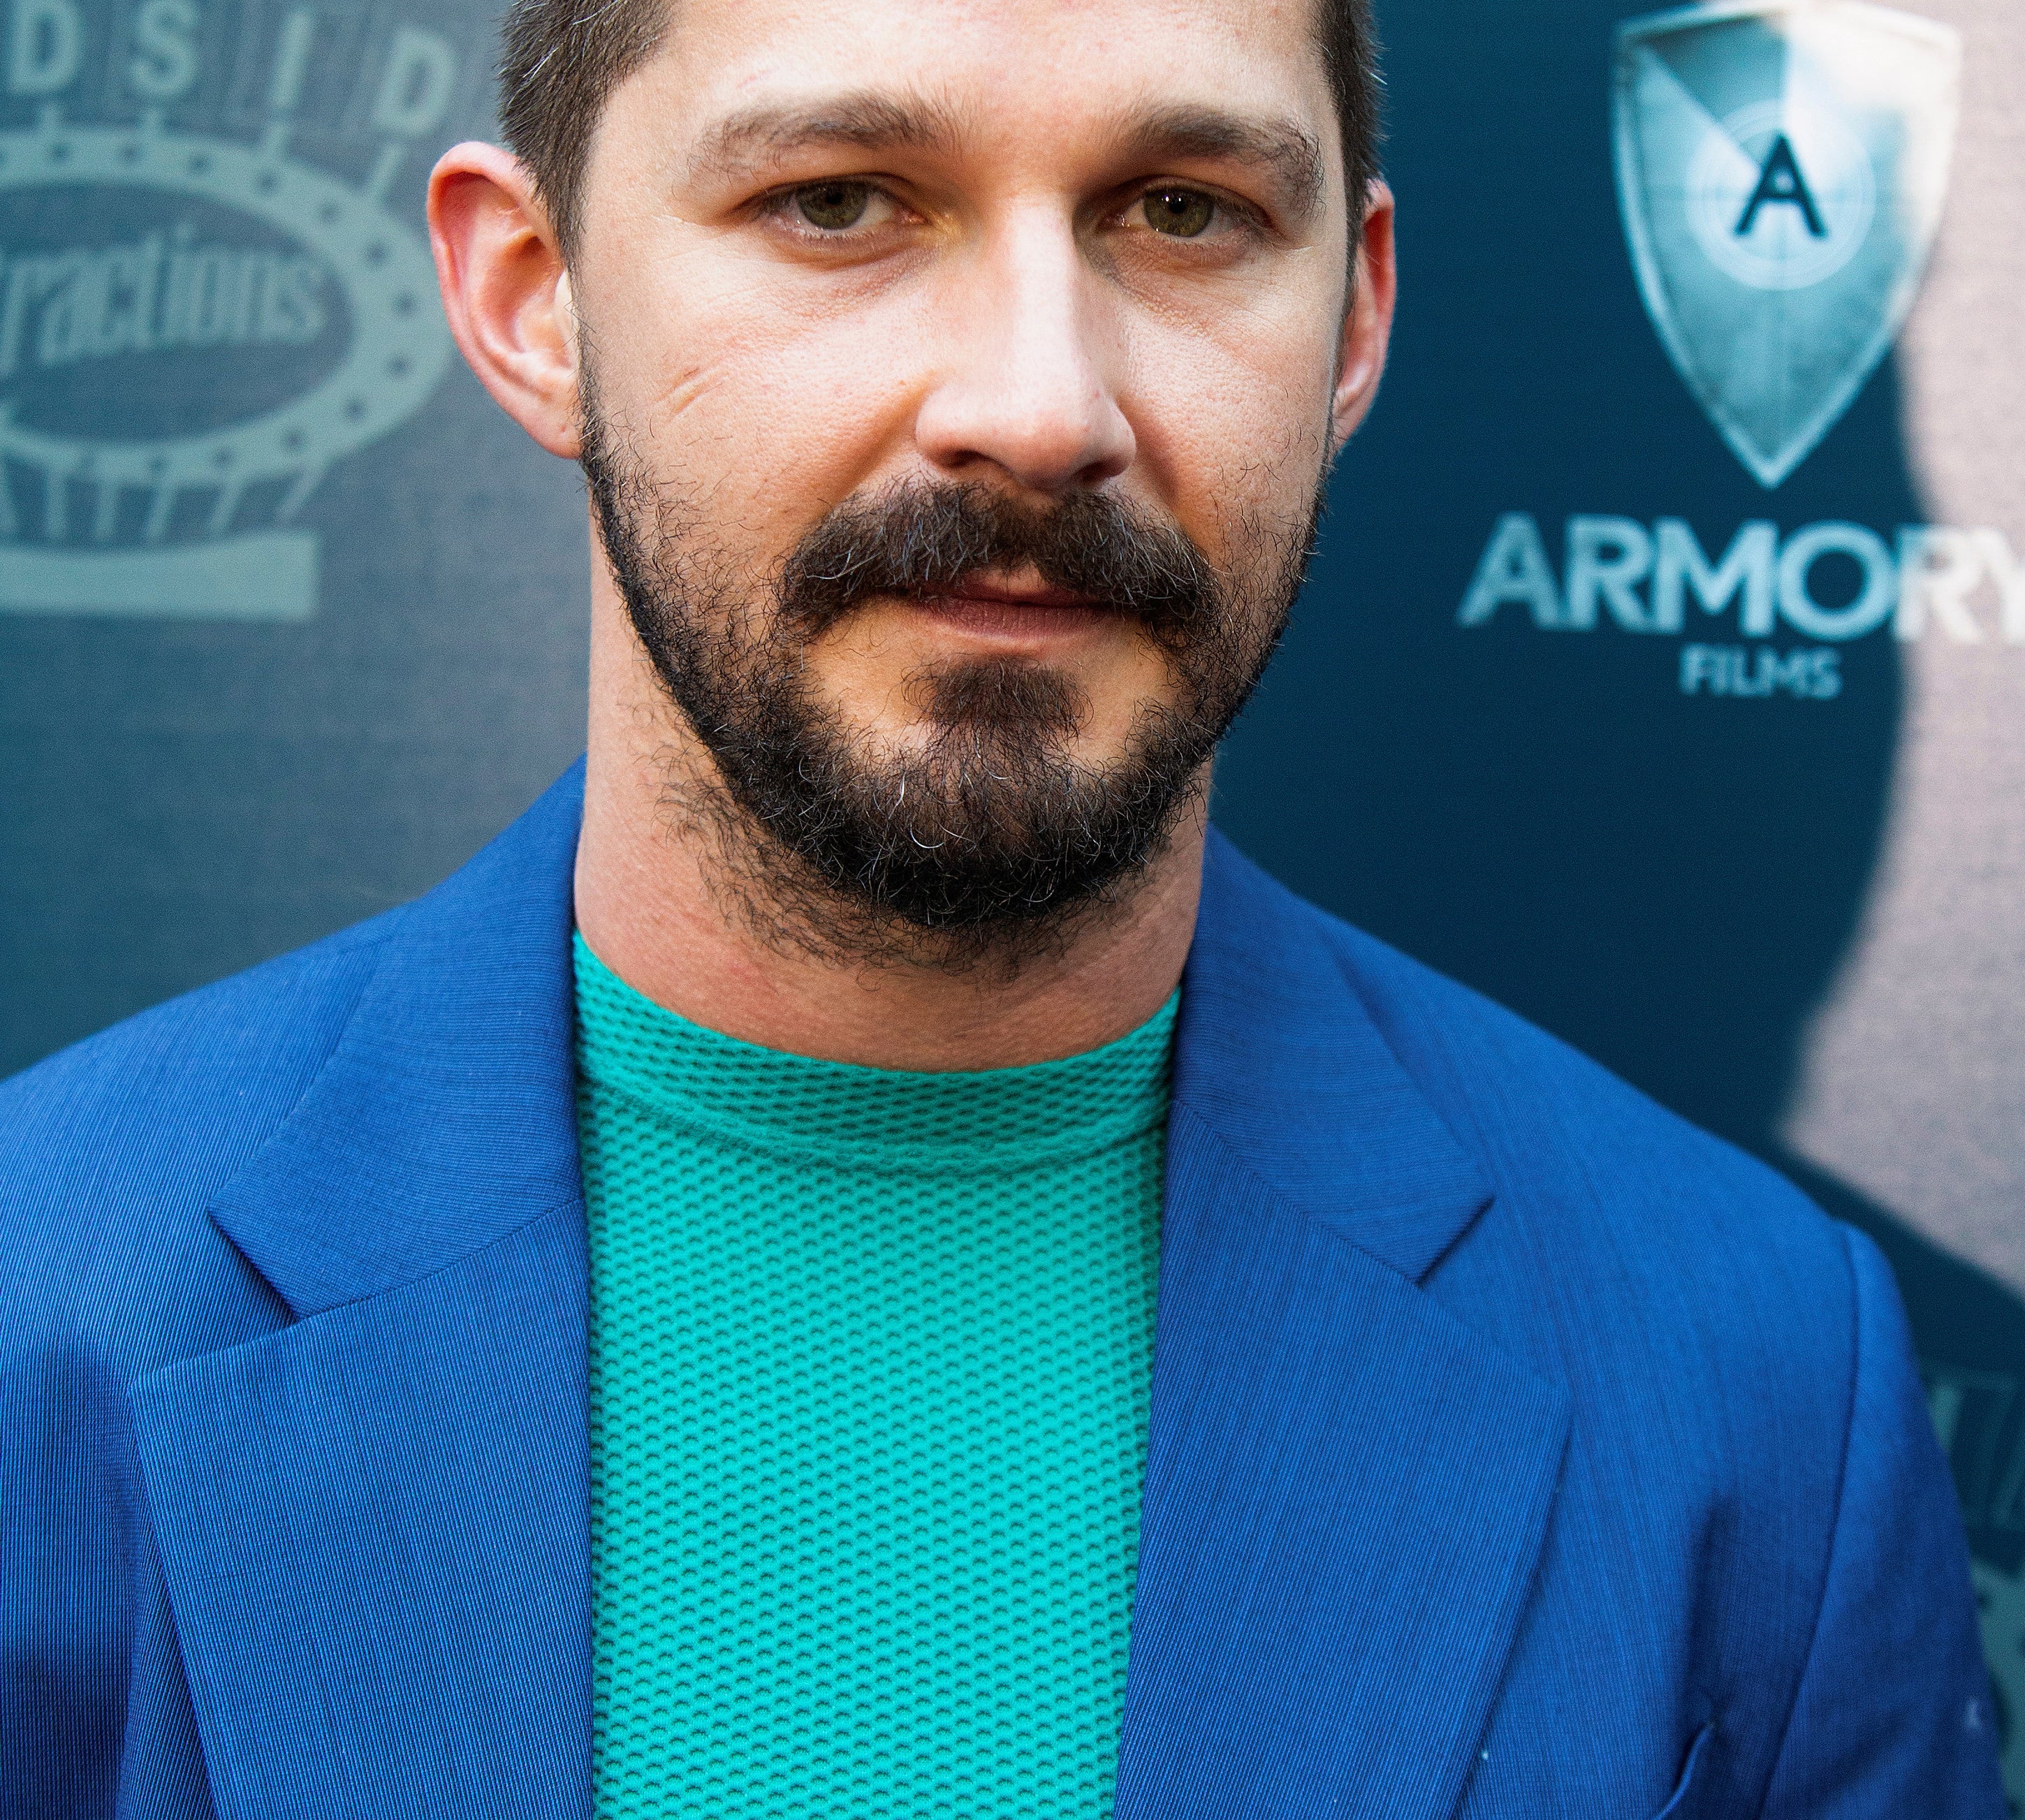 Shia LaBeouf arrives for the screening of the film The Peanut Butter Falcon in Los Angeles, California, U.S., August 1, 2019.